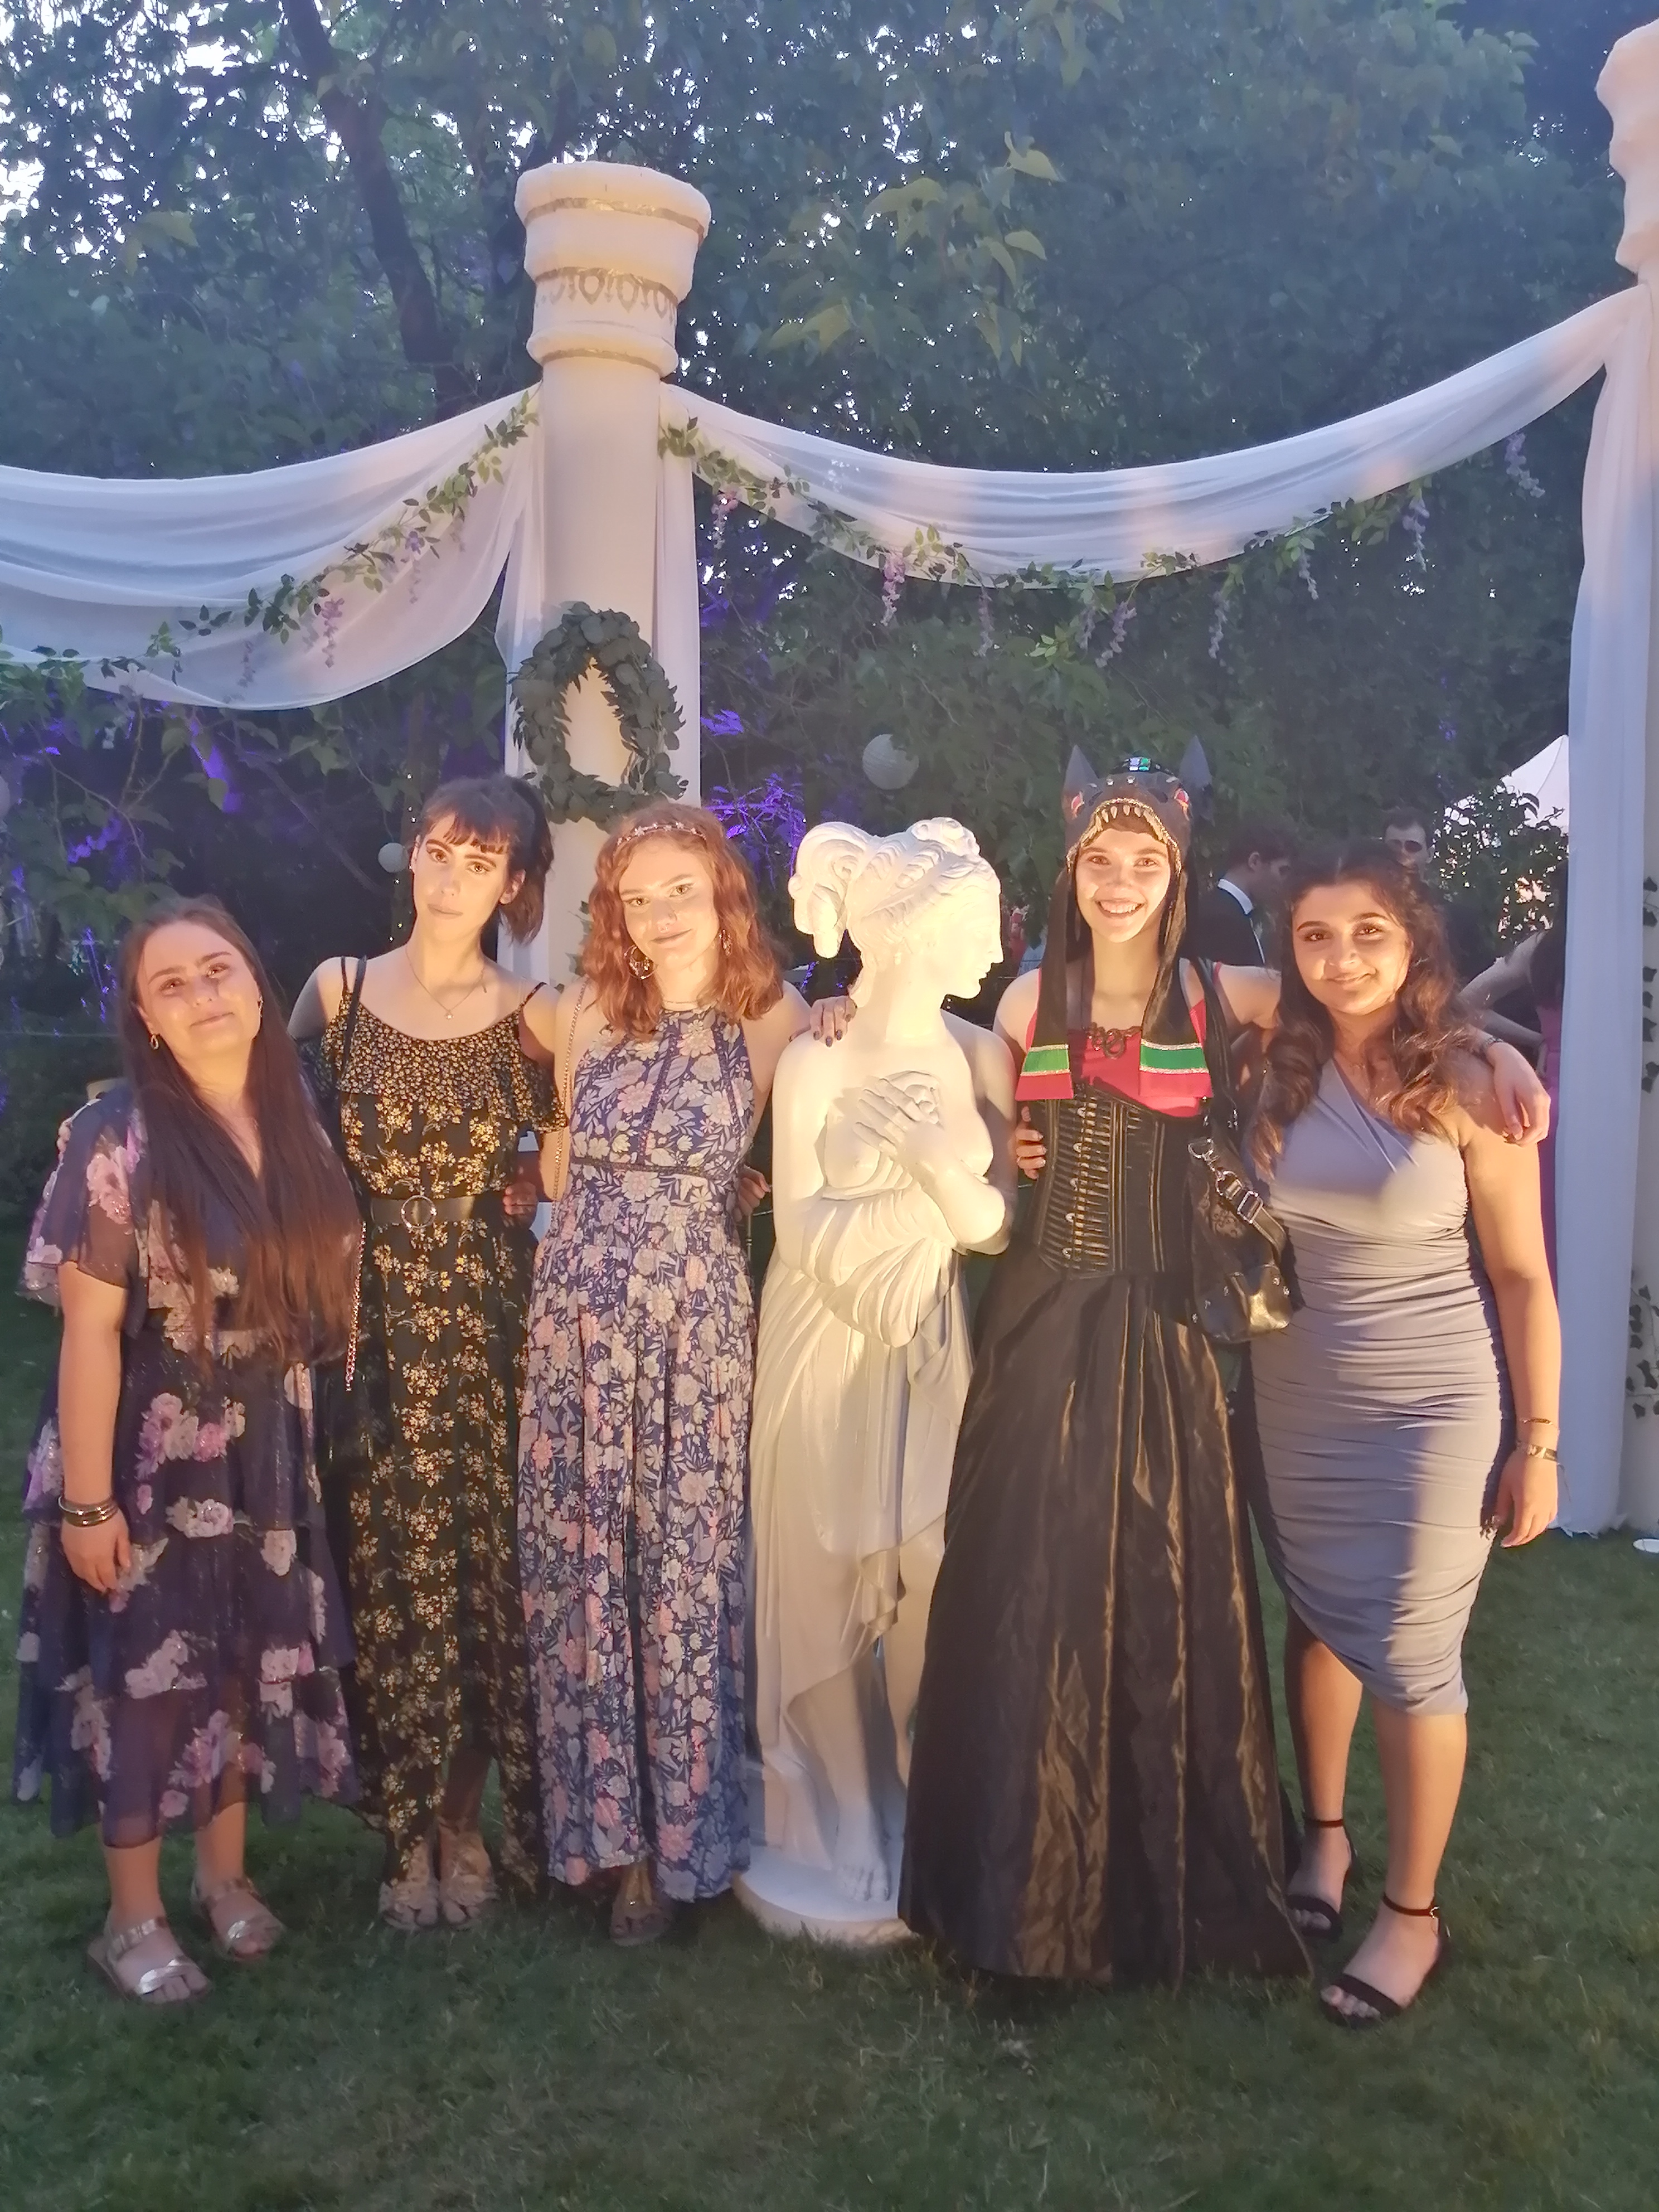 Five students in formal outfits, stood with a greek-style statue